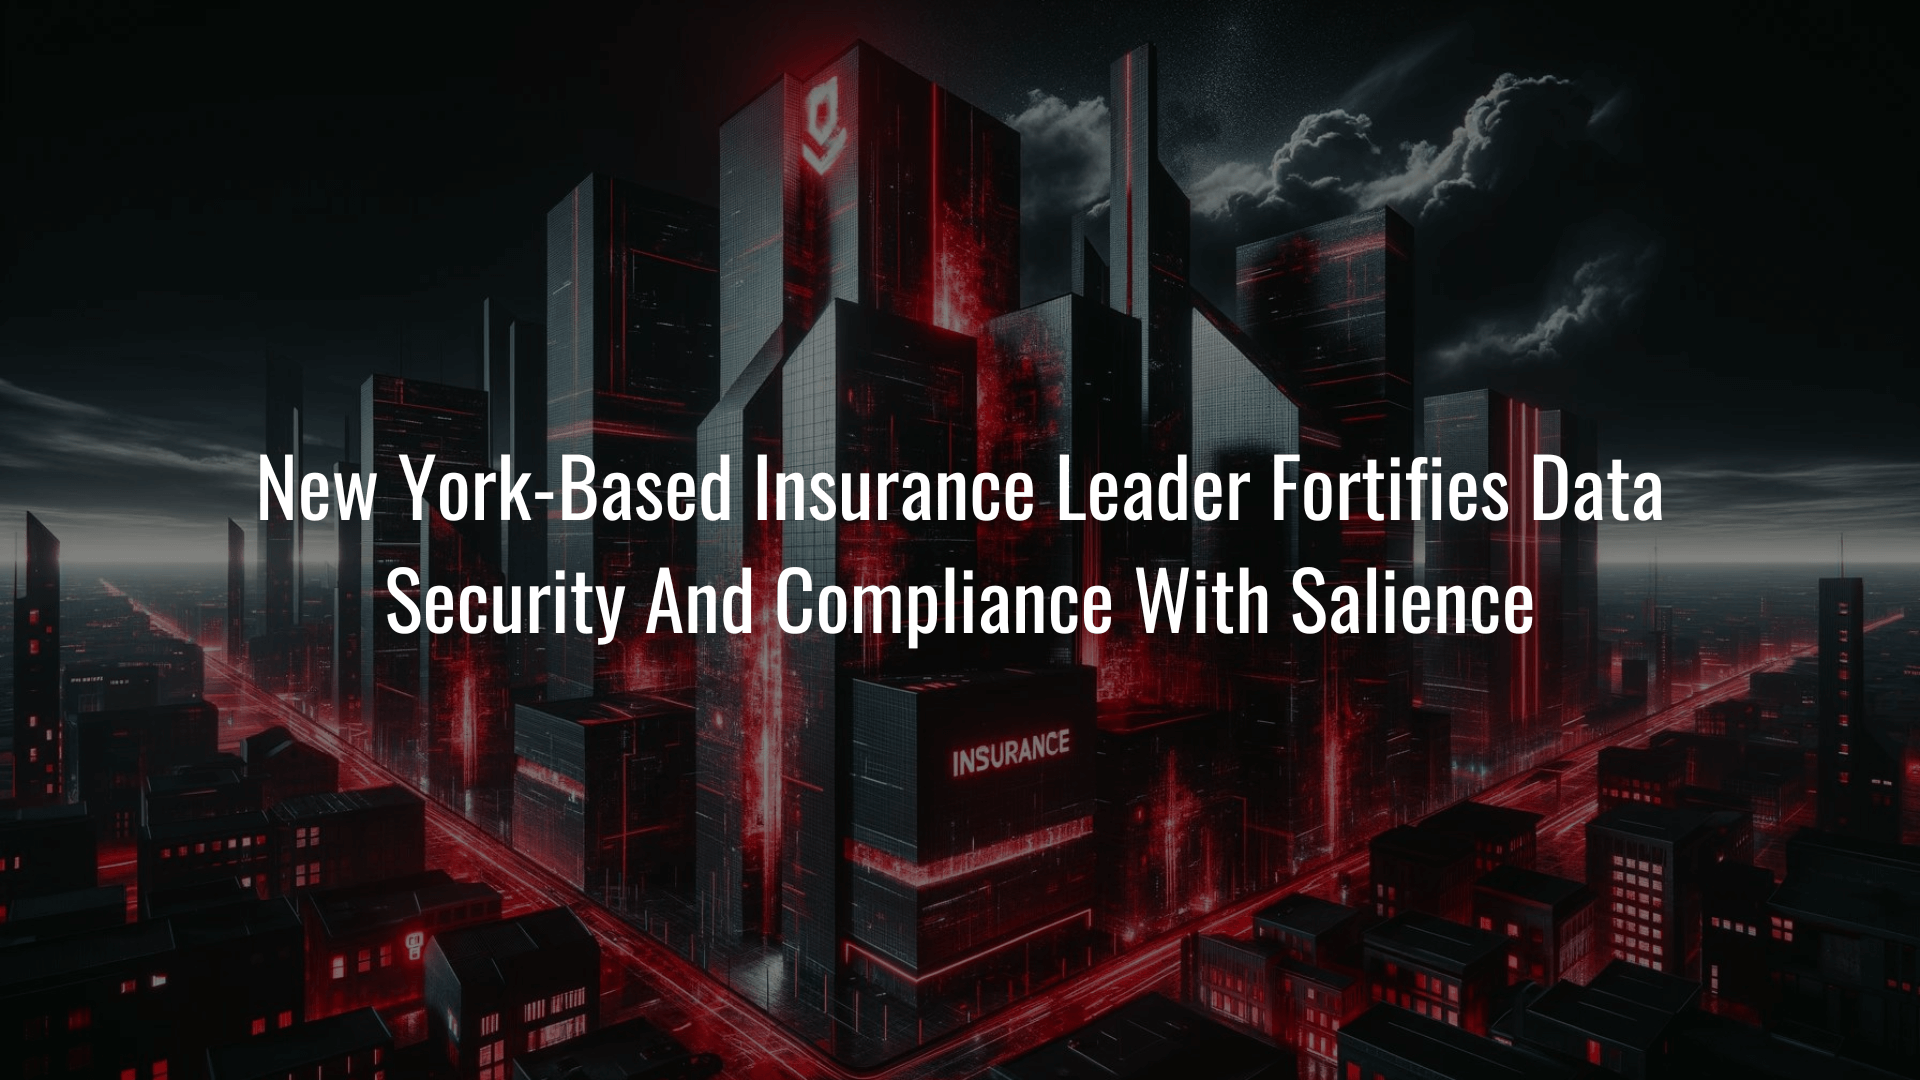 New York-Based Insurance Leader Fortifies Data Security and Compliance with Salience